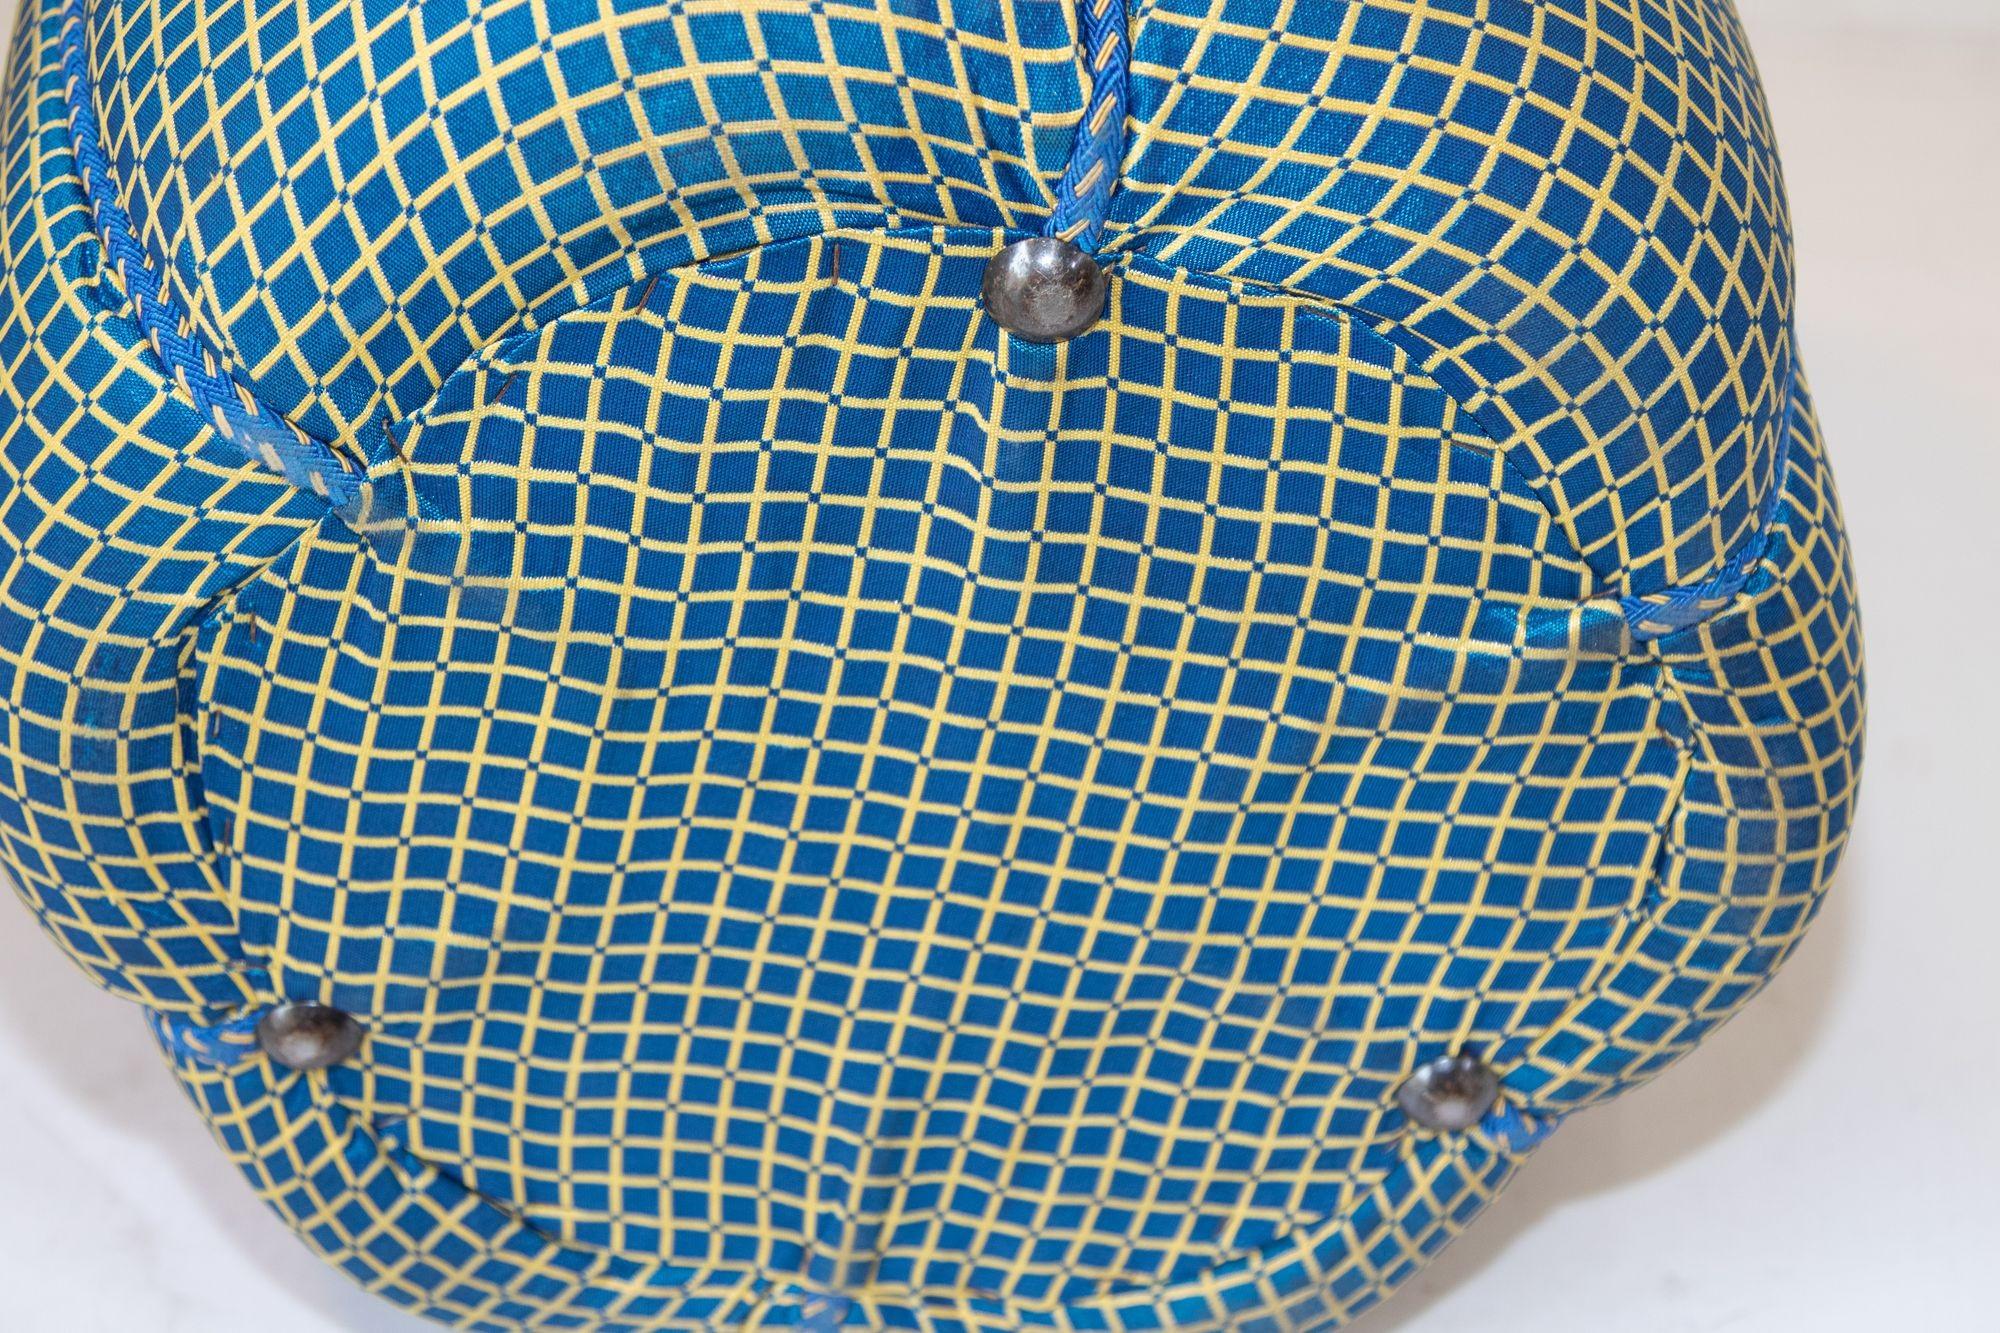 Vintage Art Deco Style Pouf Turquoise Upholstered Round Stool For Sale 3